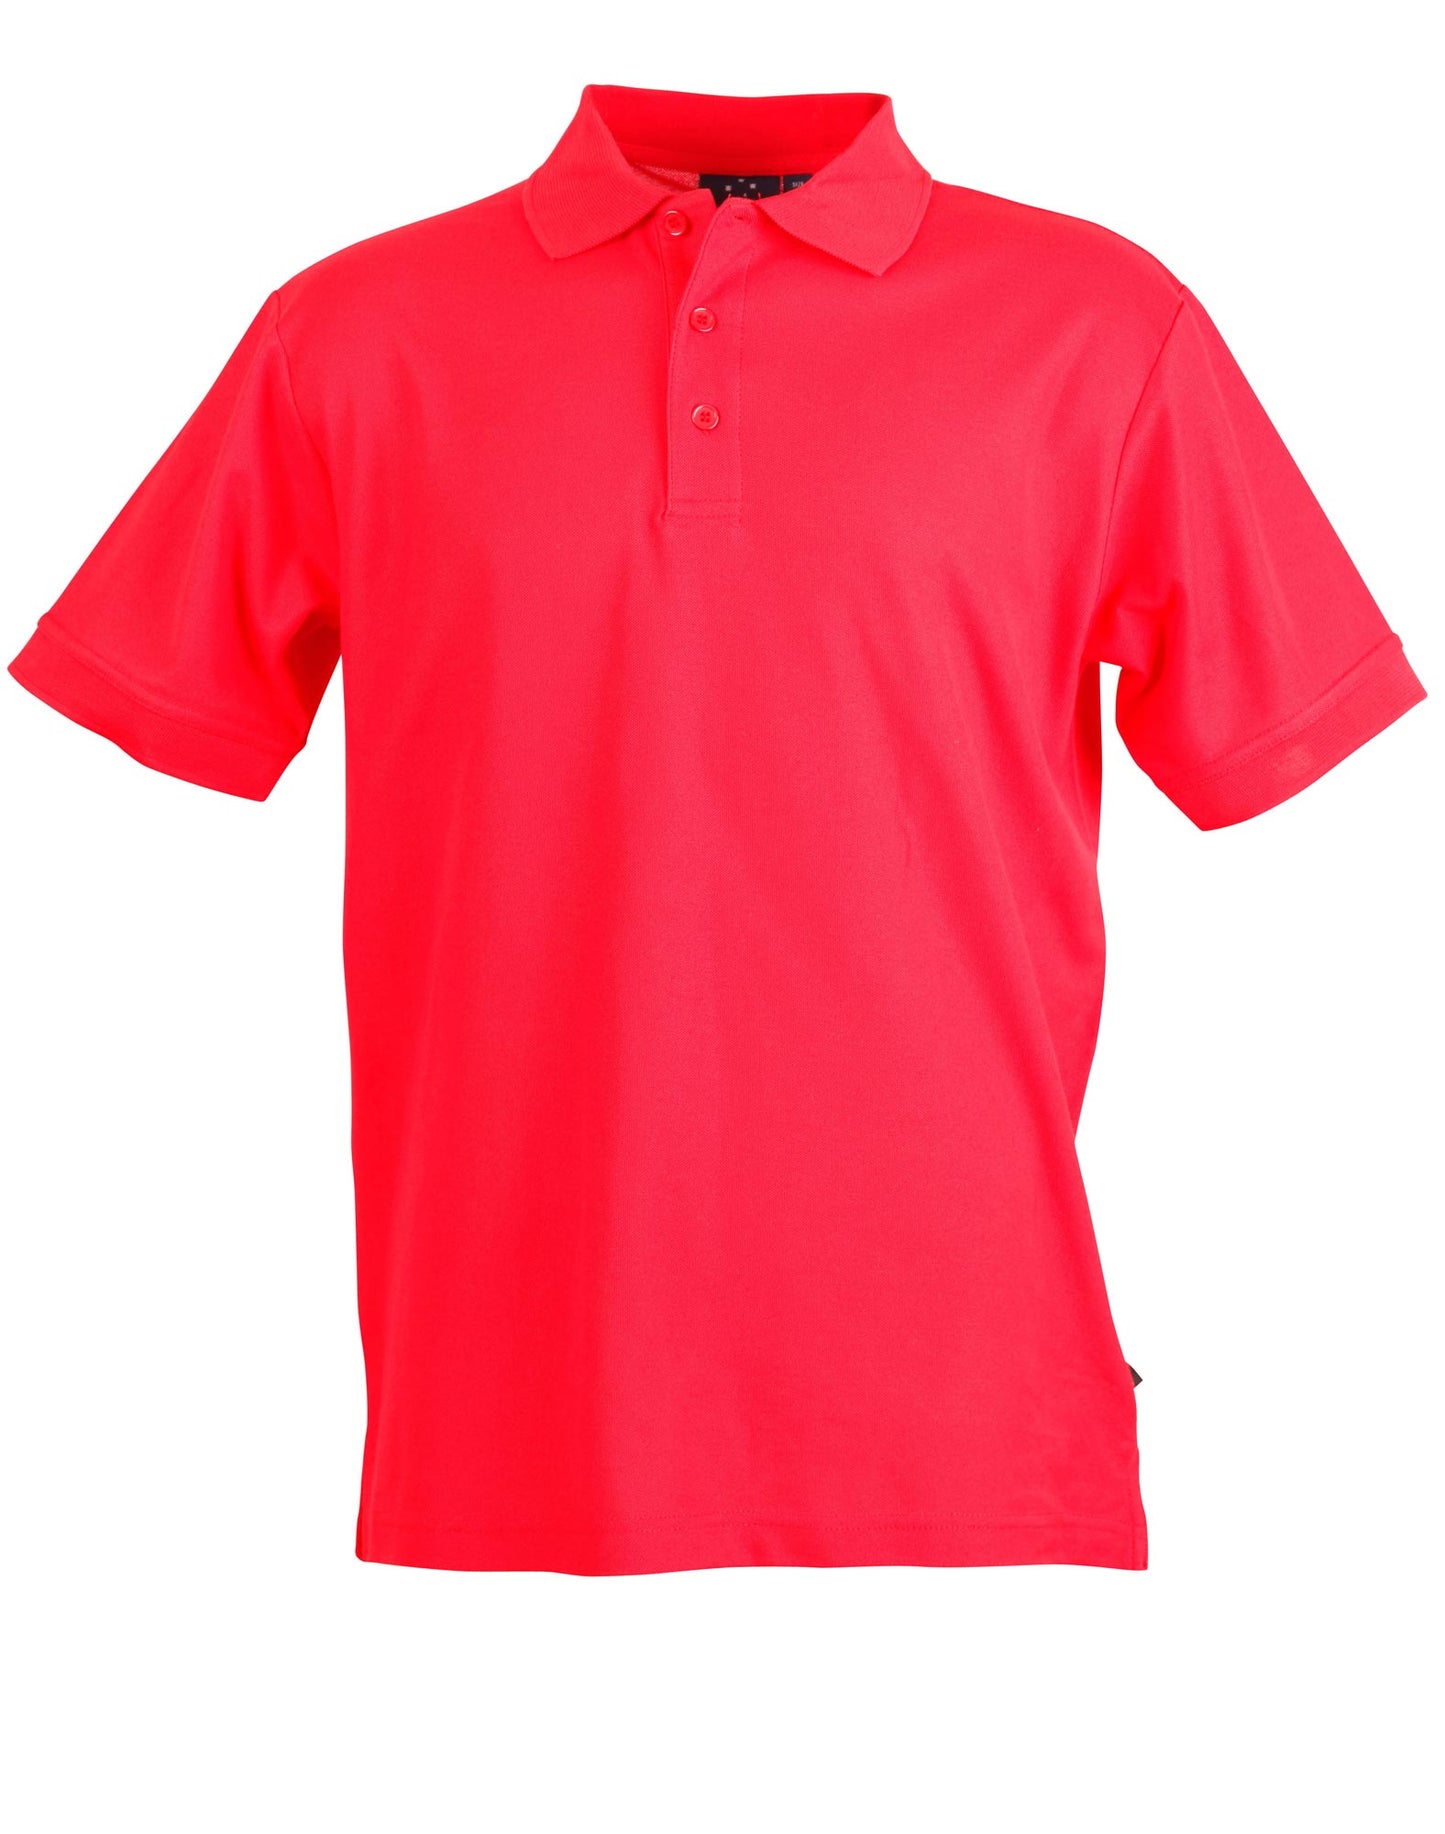 Truedry Short Sleeve Polo - made by AIW